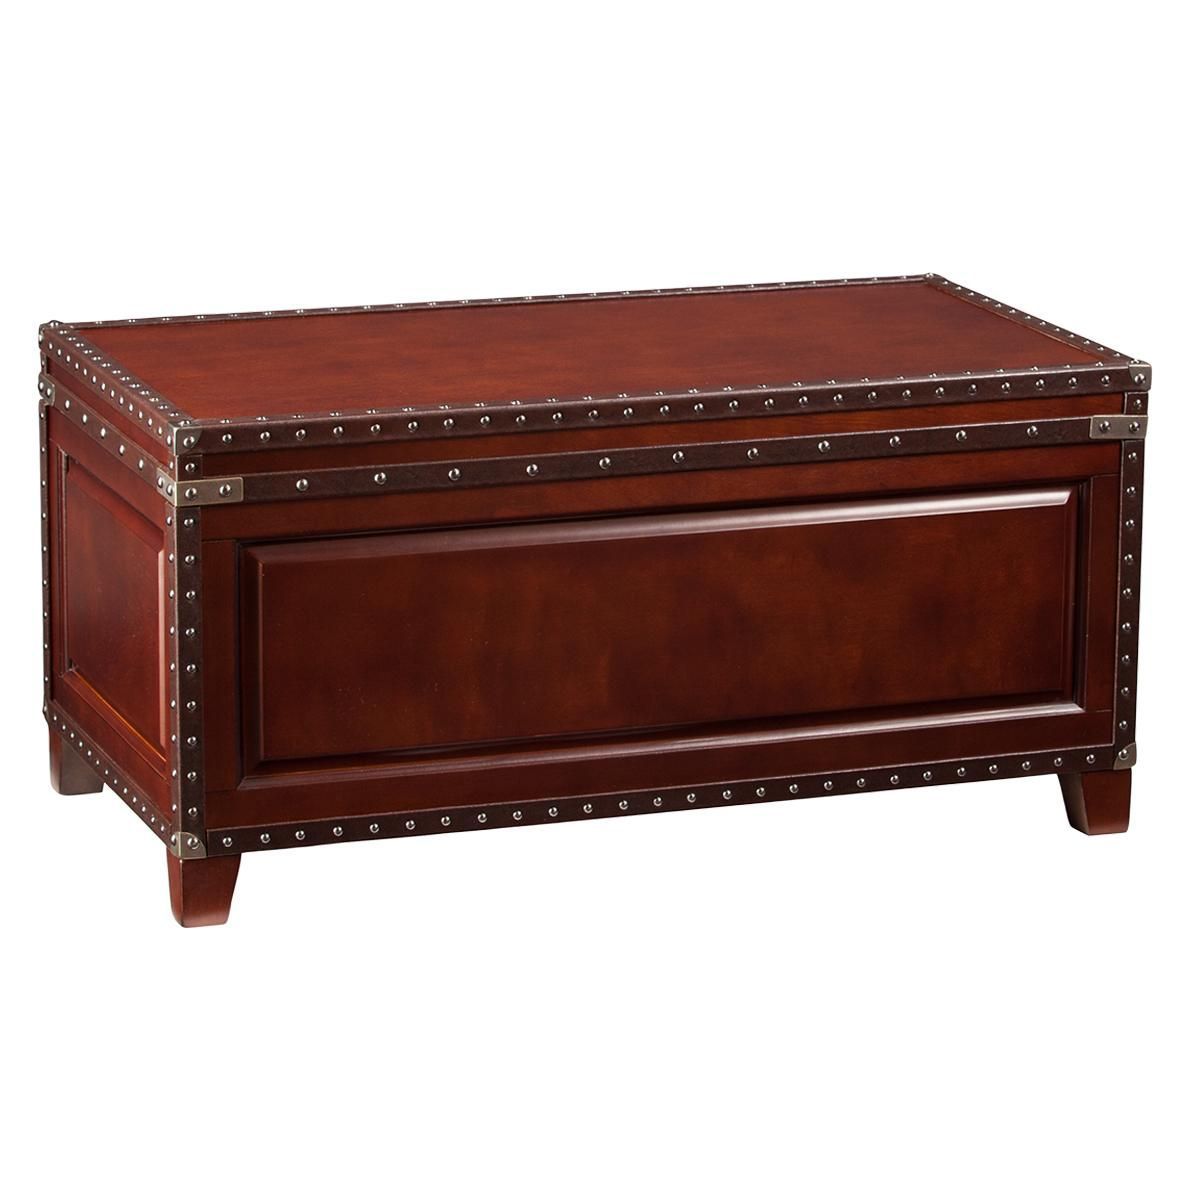 Southern Enterprises Amherst Trunk Cocktail Table | Nebraska Furniture Throughout Southern Enterprises Larksmill Coffee Tables (View 13 of 20)